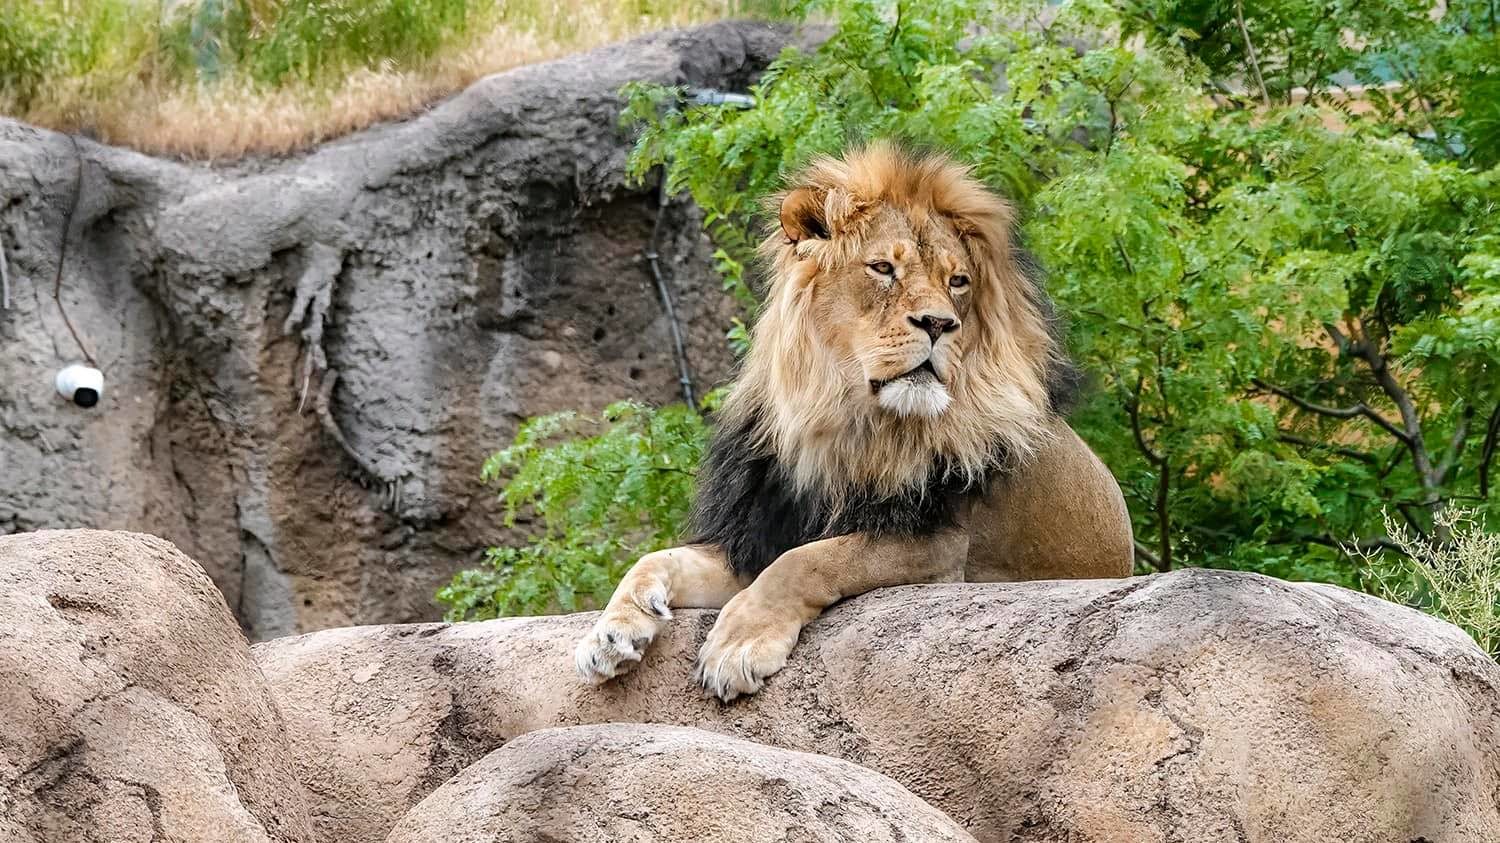 hogle zoo lion pictured...